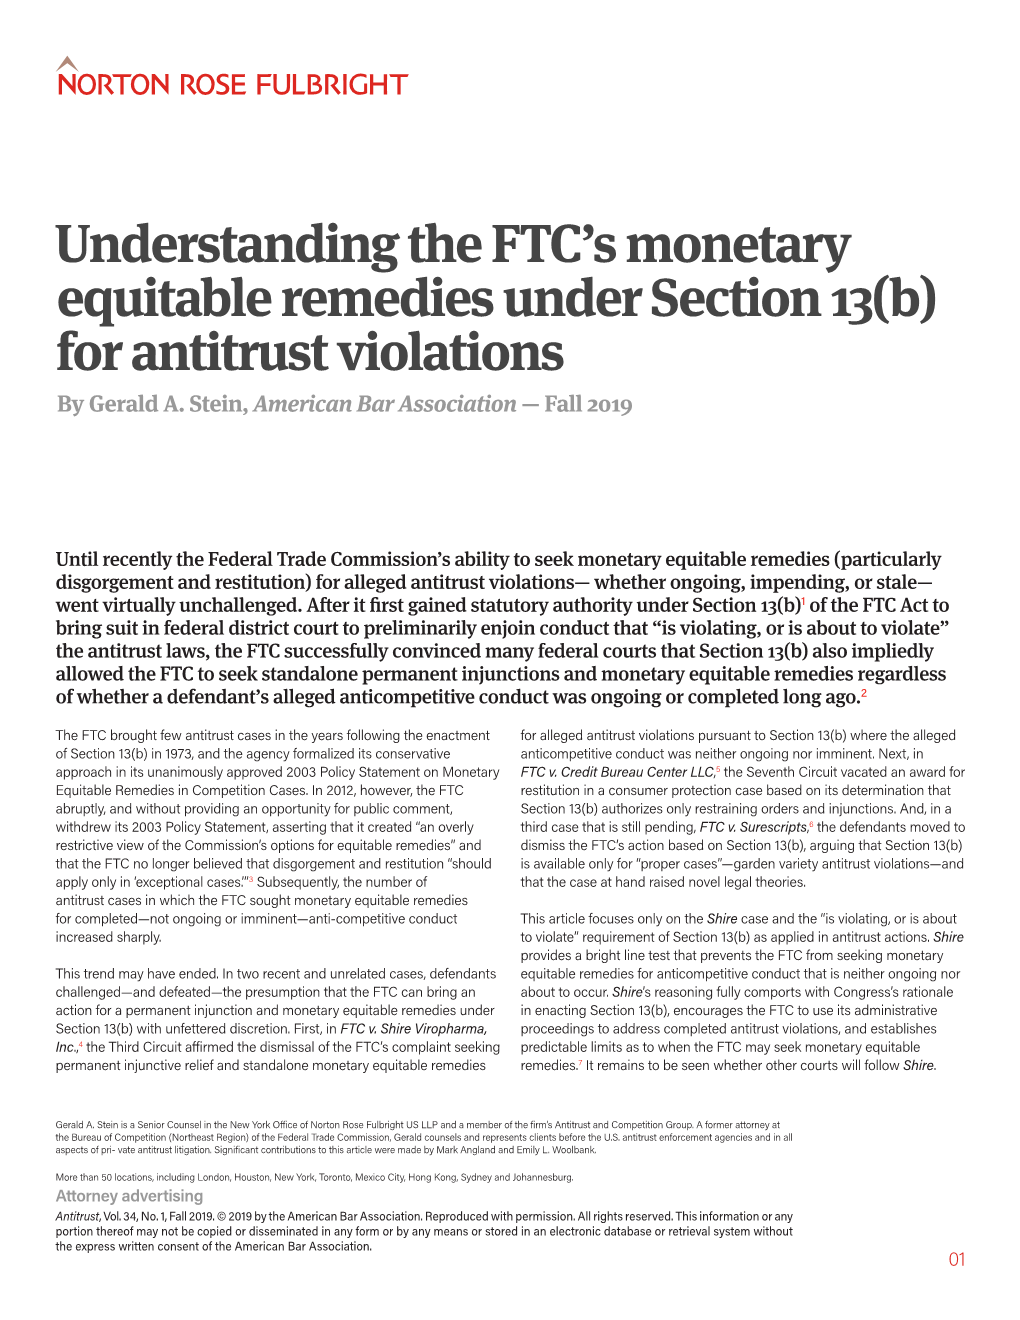 Understanding the FTC's Monetary Equitable Remedies Under Section